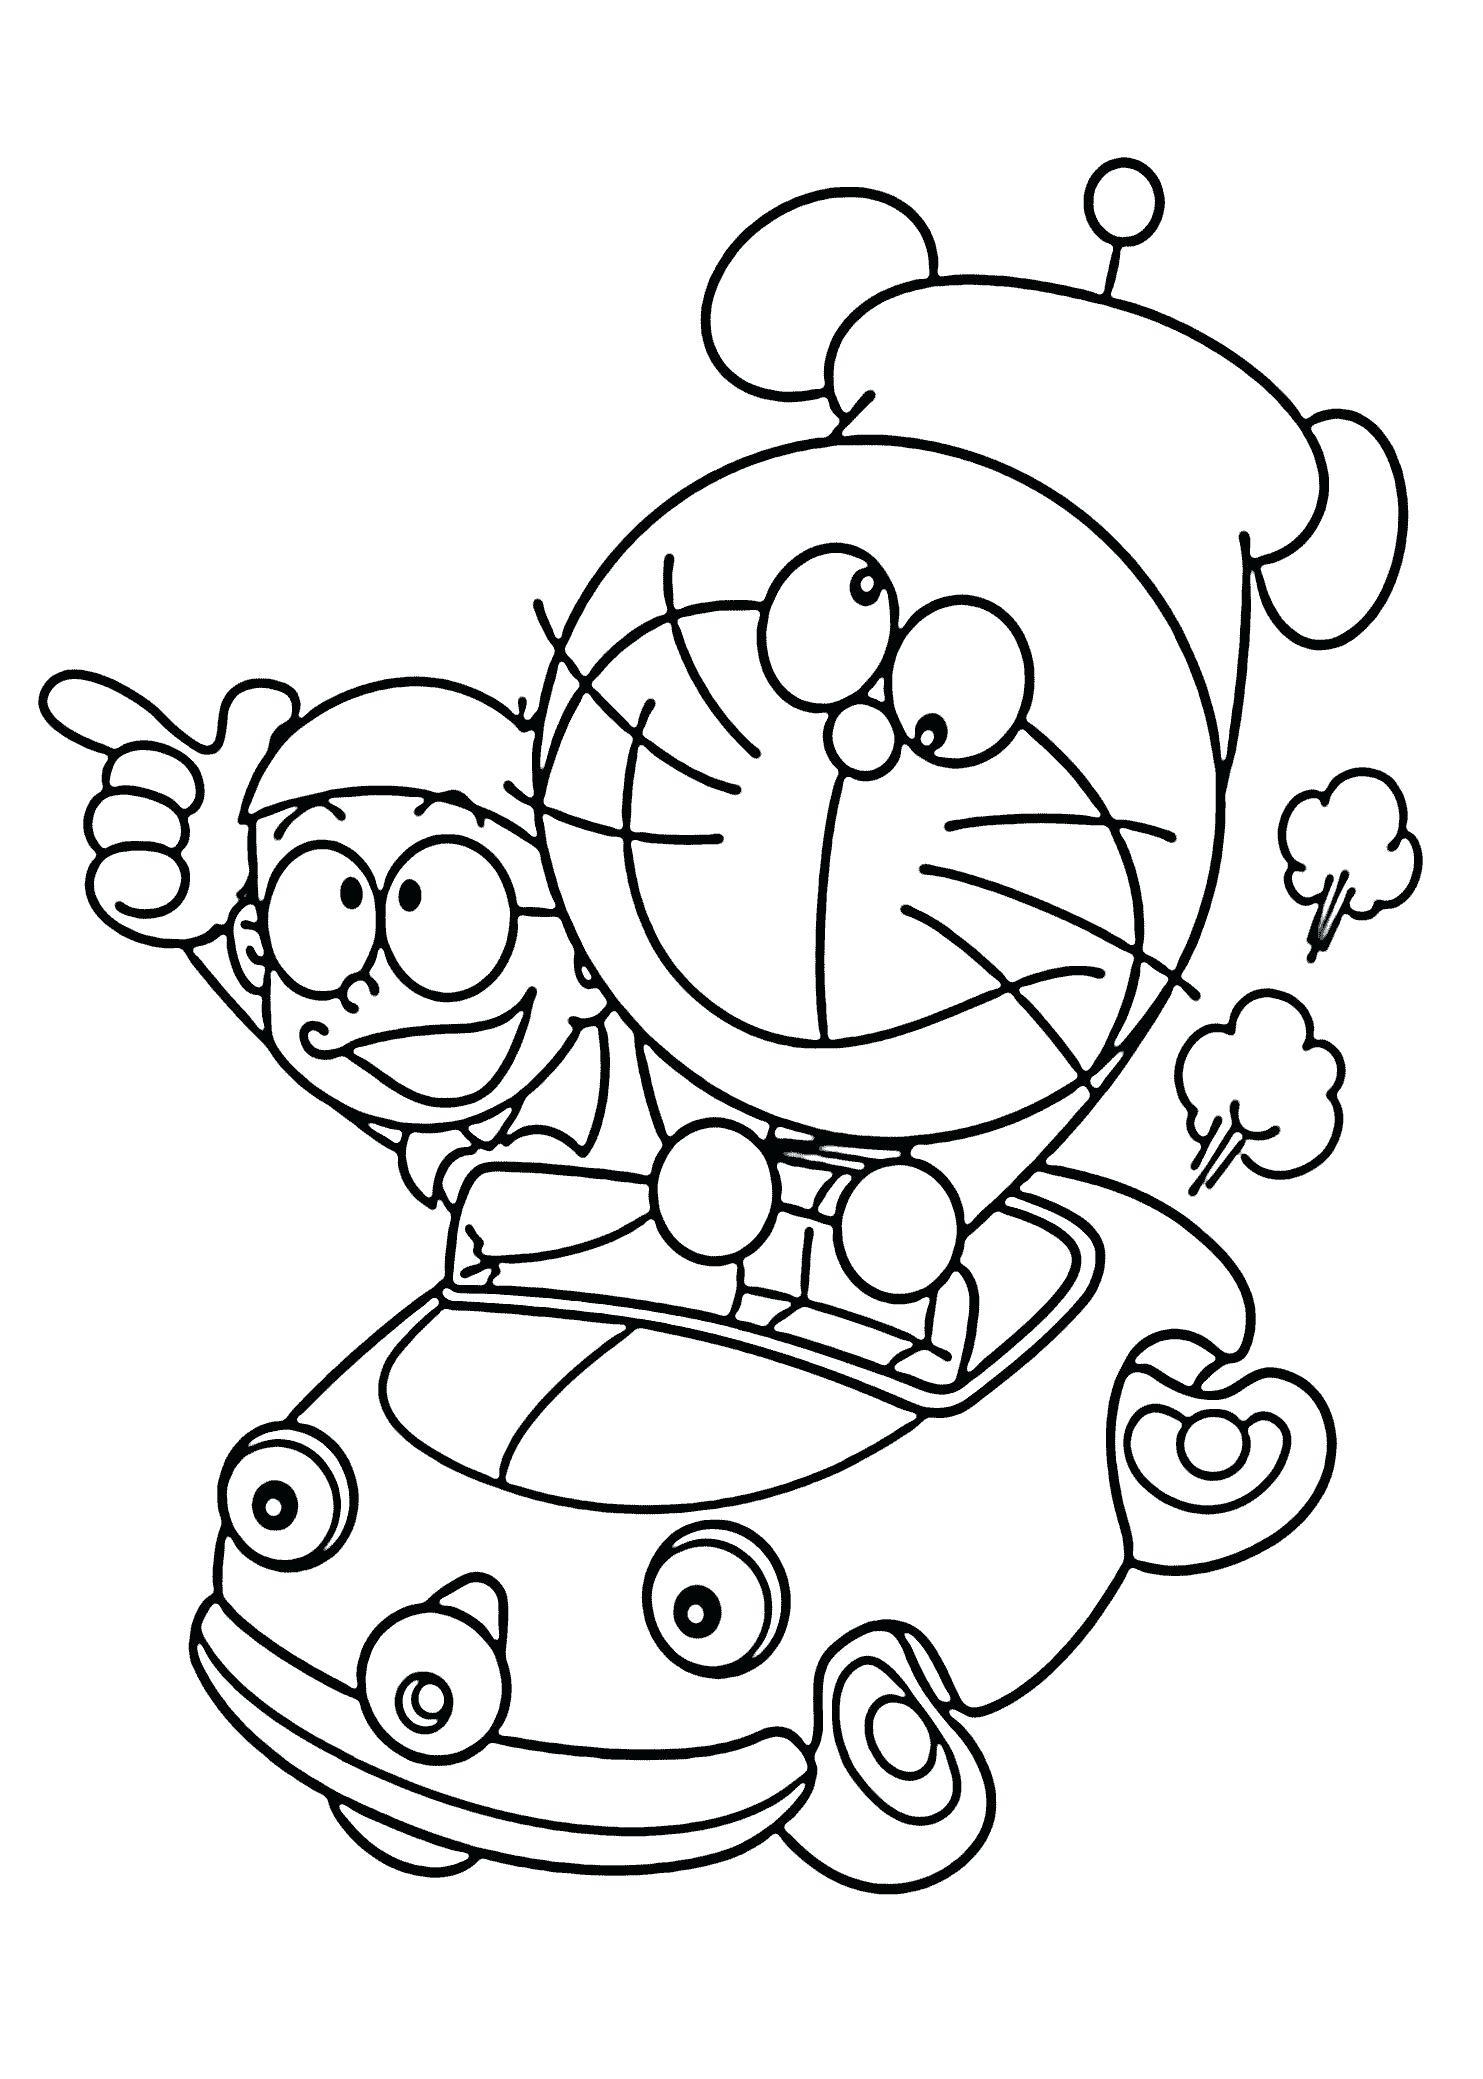 Candyland Characters Coloring Pages Candyland Coloring Sheets Justpageco